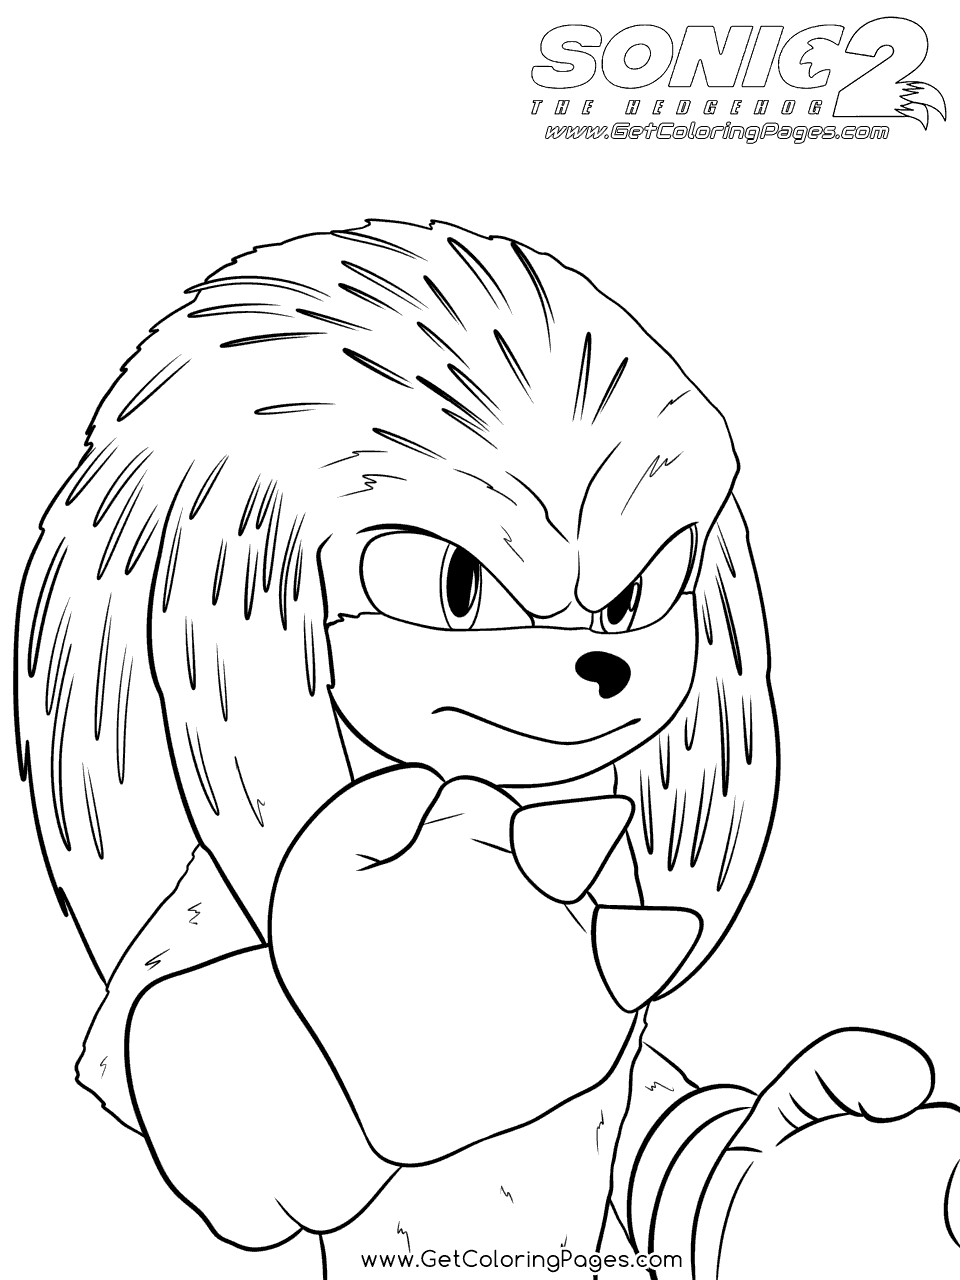 Sonic Knuckles From Sonic The Hedgehog 2 Coloring Page Free Printable